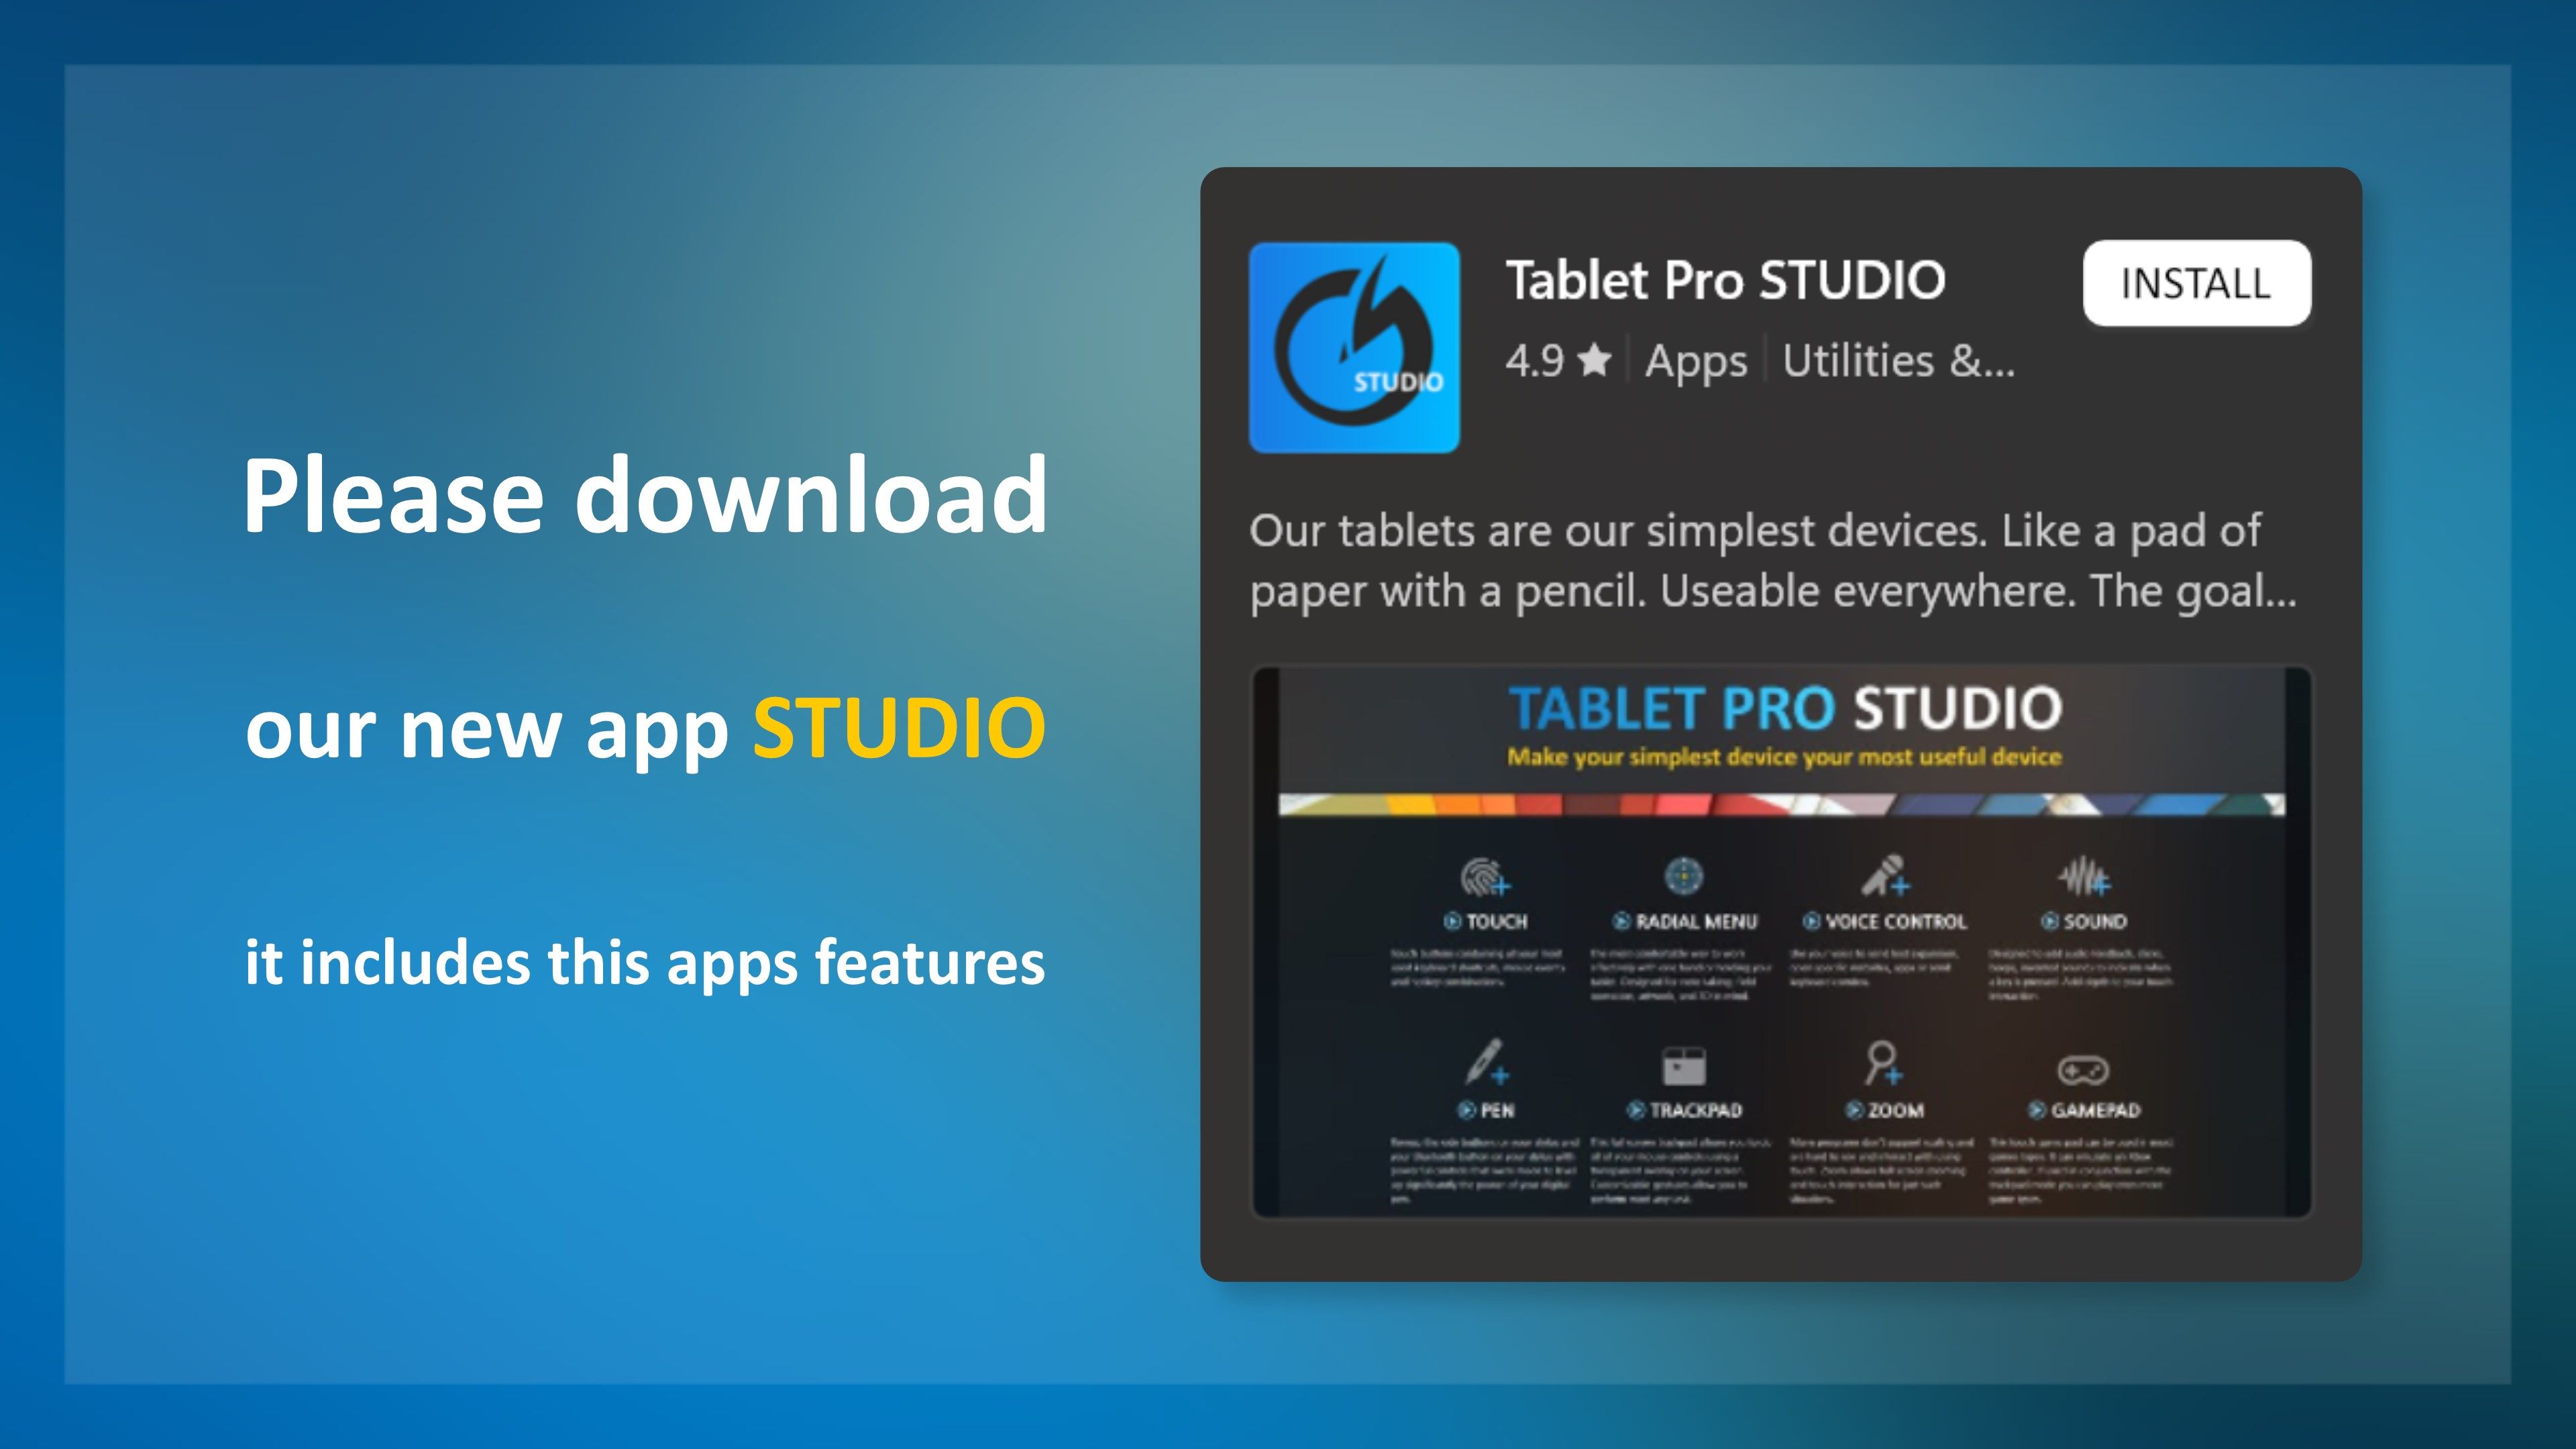 Please download our new application Tablet Pro STUDIO. The functions from this app have been improved and added into the STUDIO app. Thank you 😊